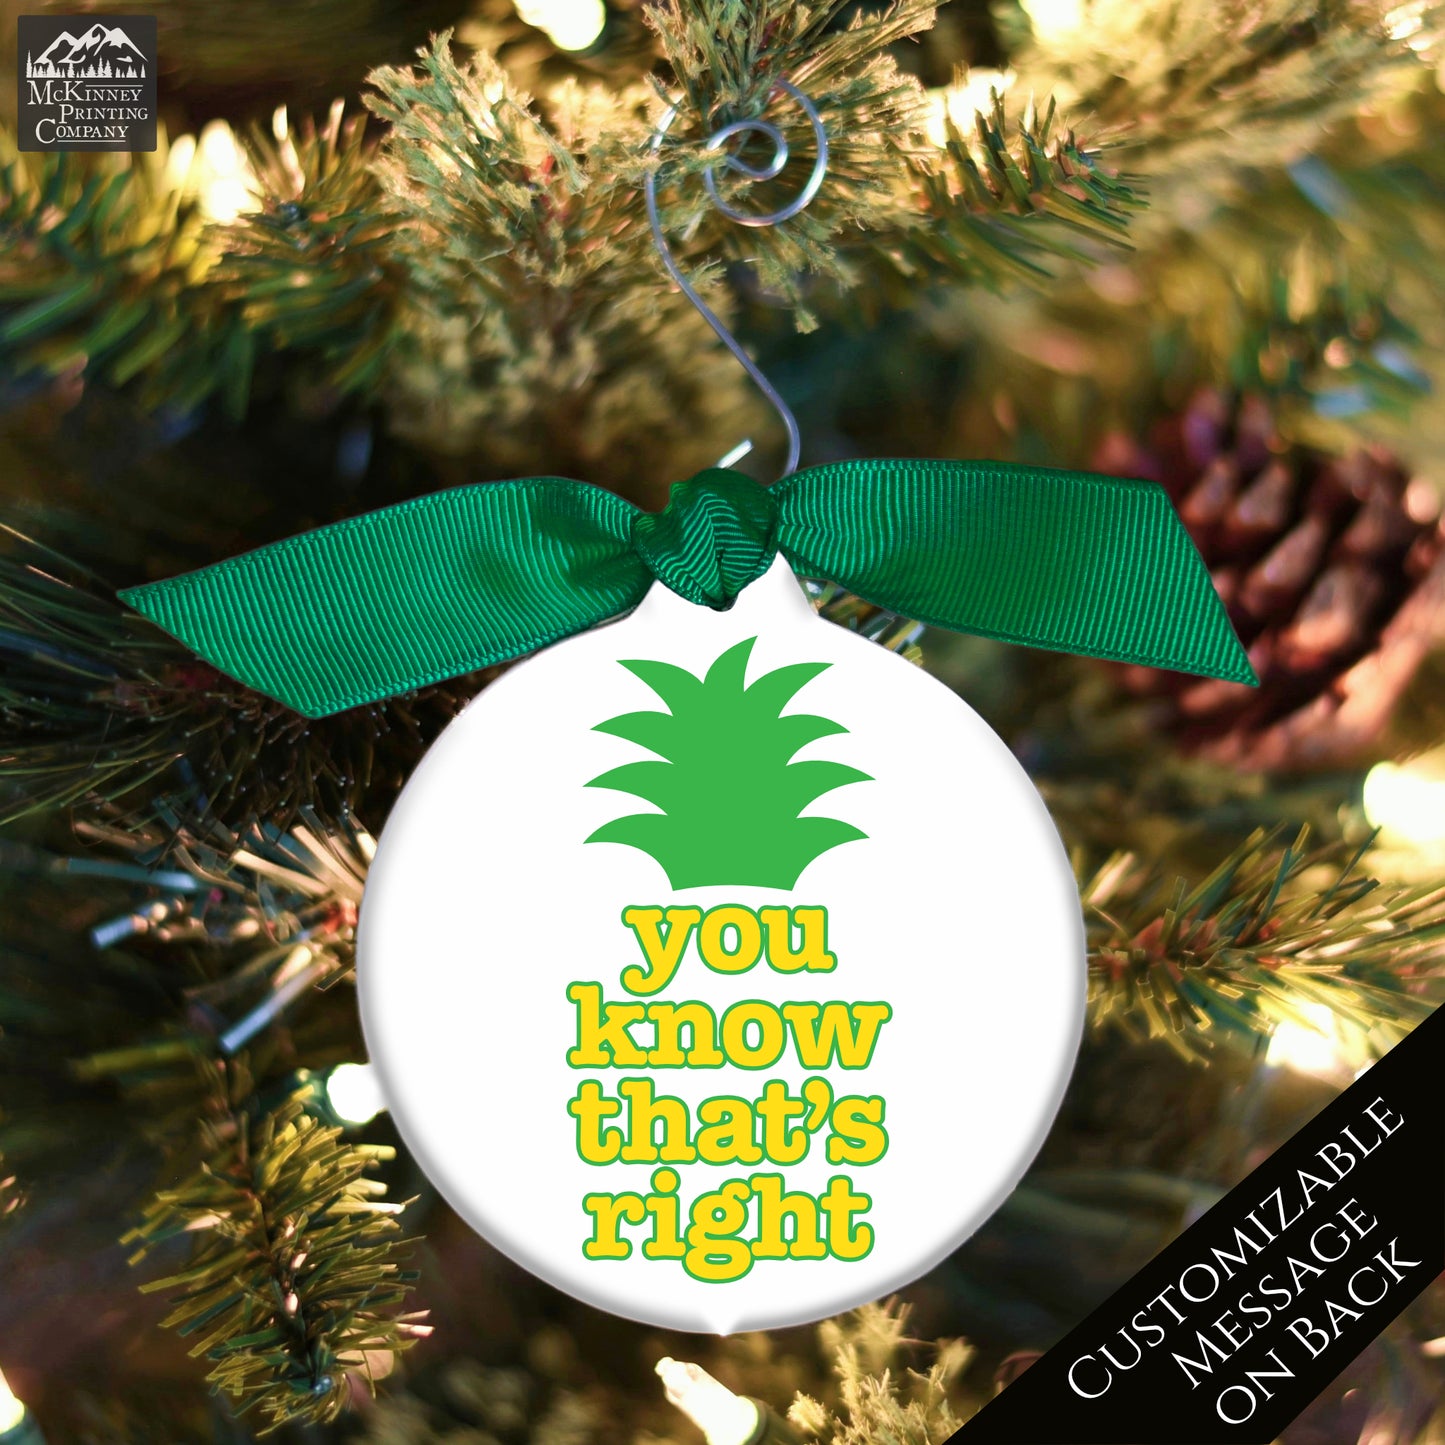 Psych TV Show - Christmas Ornament, Pineapple, Shawn, Gus, Quote